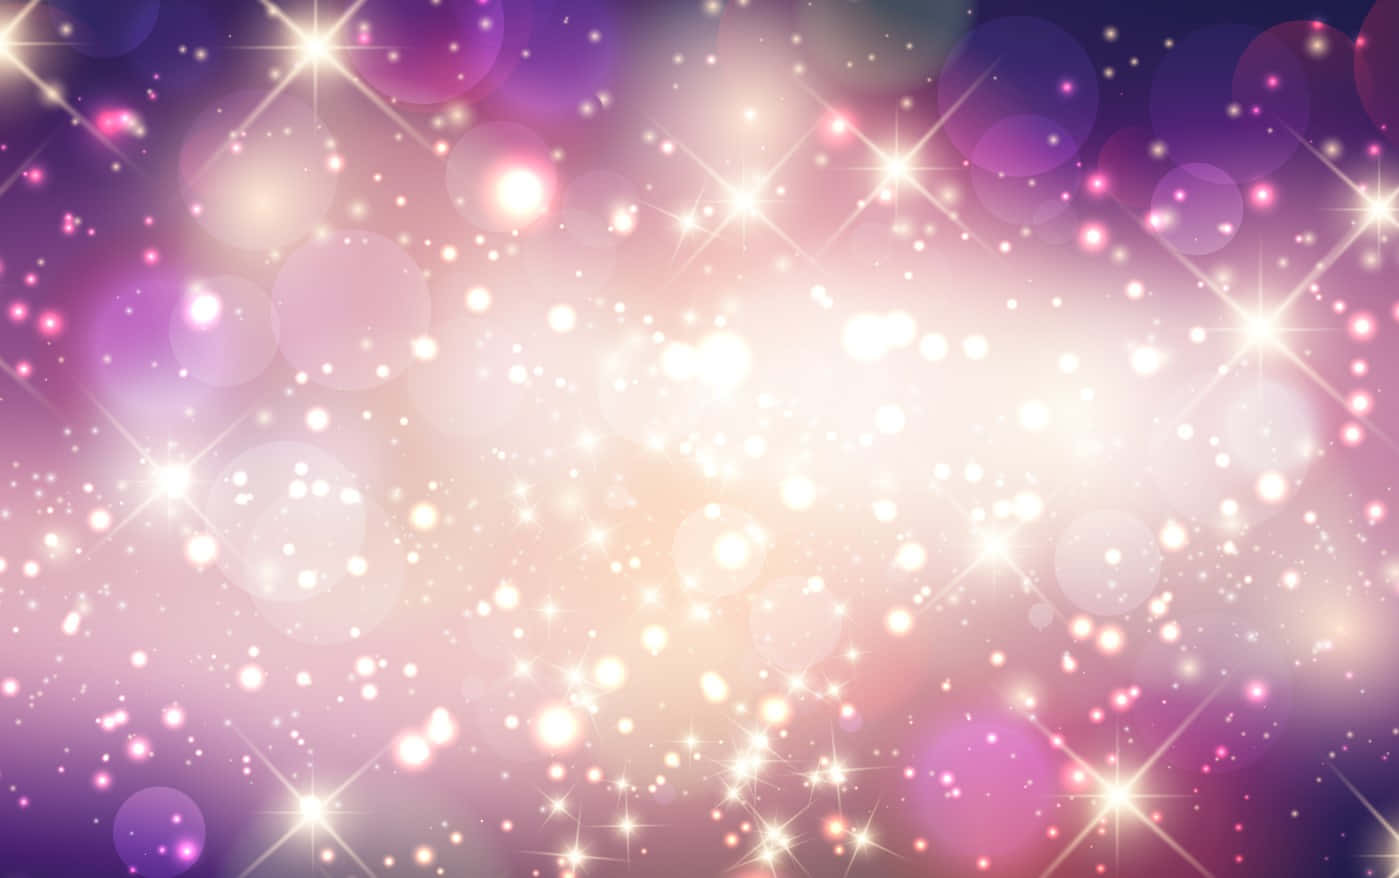 Illuminate your day with a sparkle background!